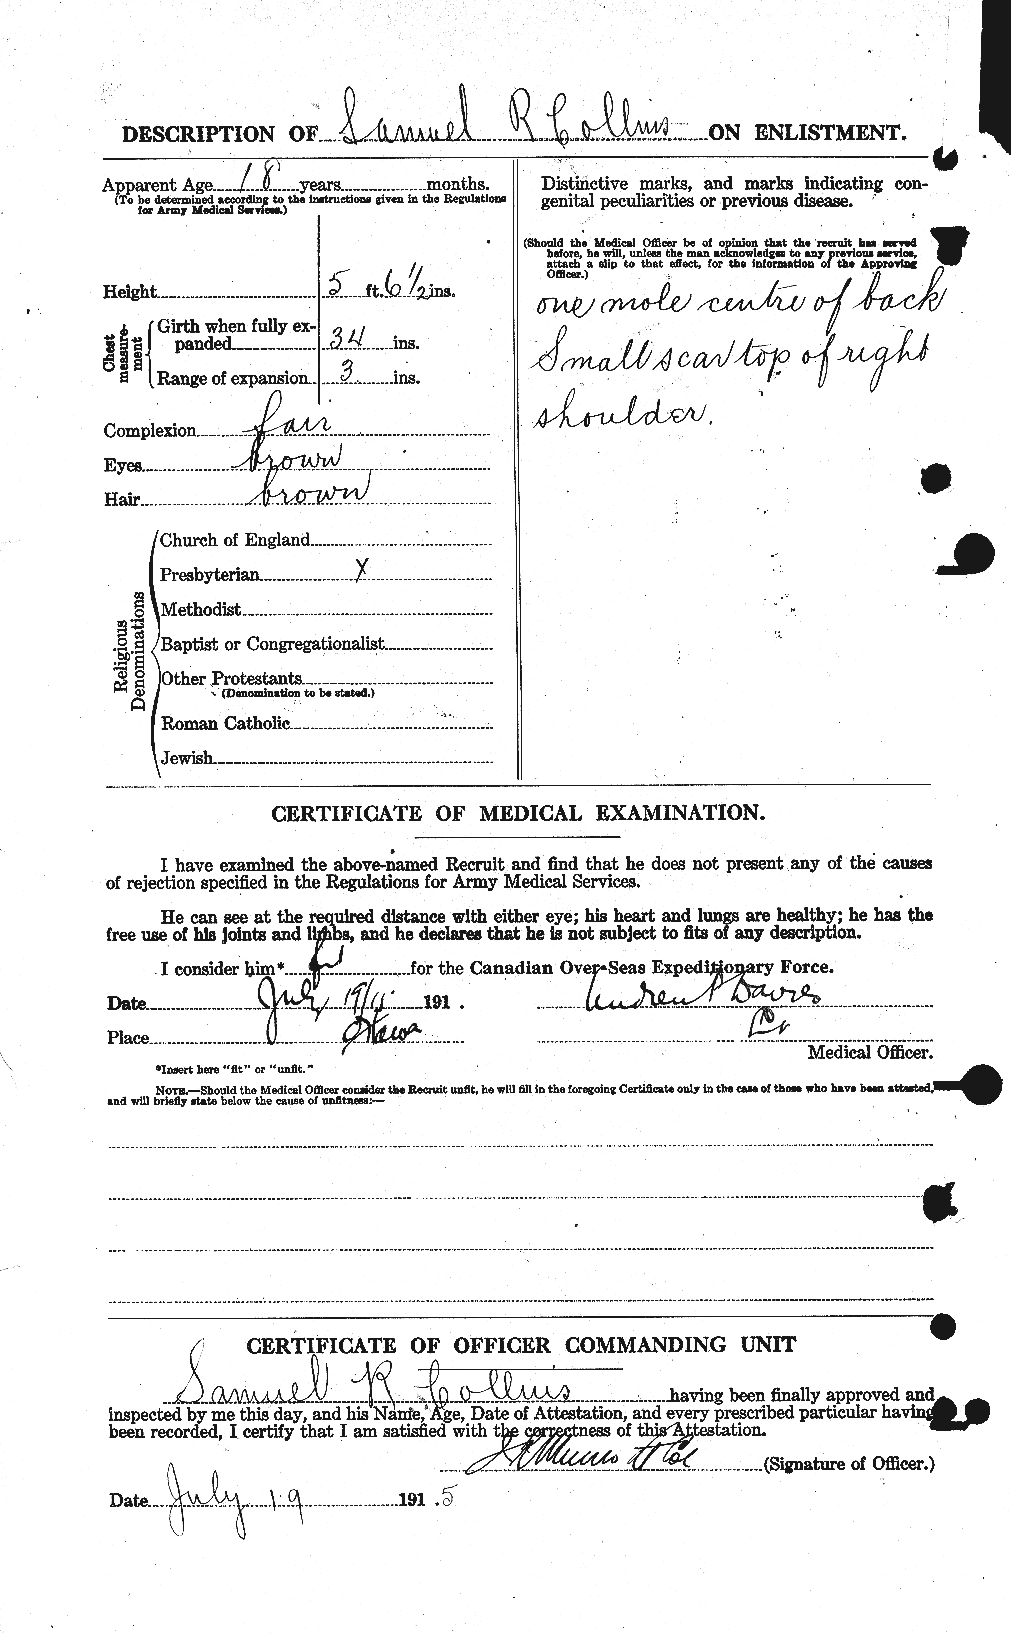 Personnel Records of the First World War - CEF 069159b